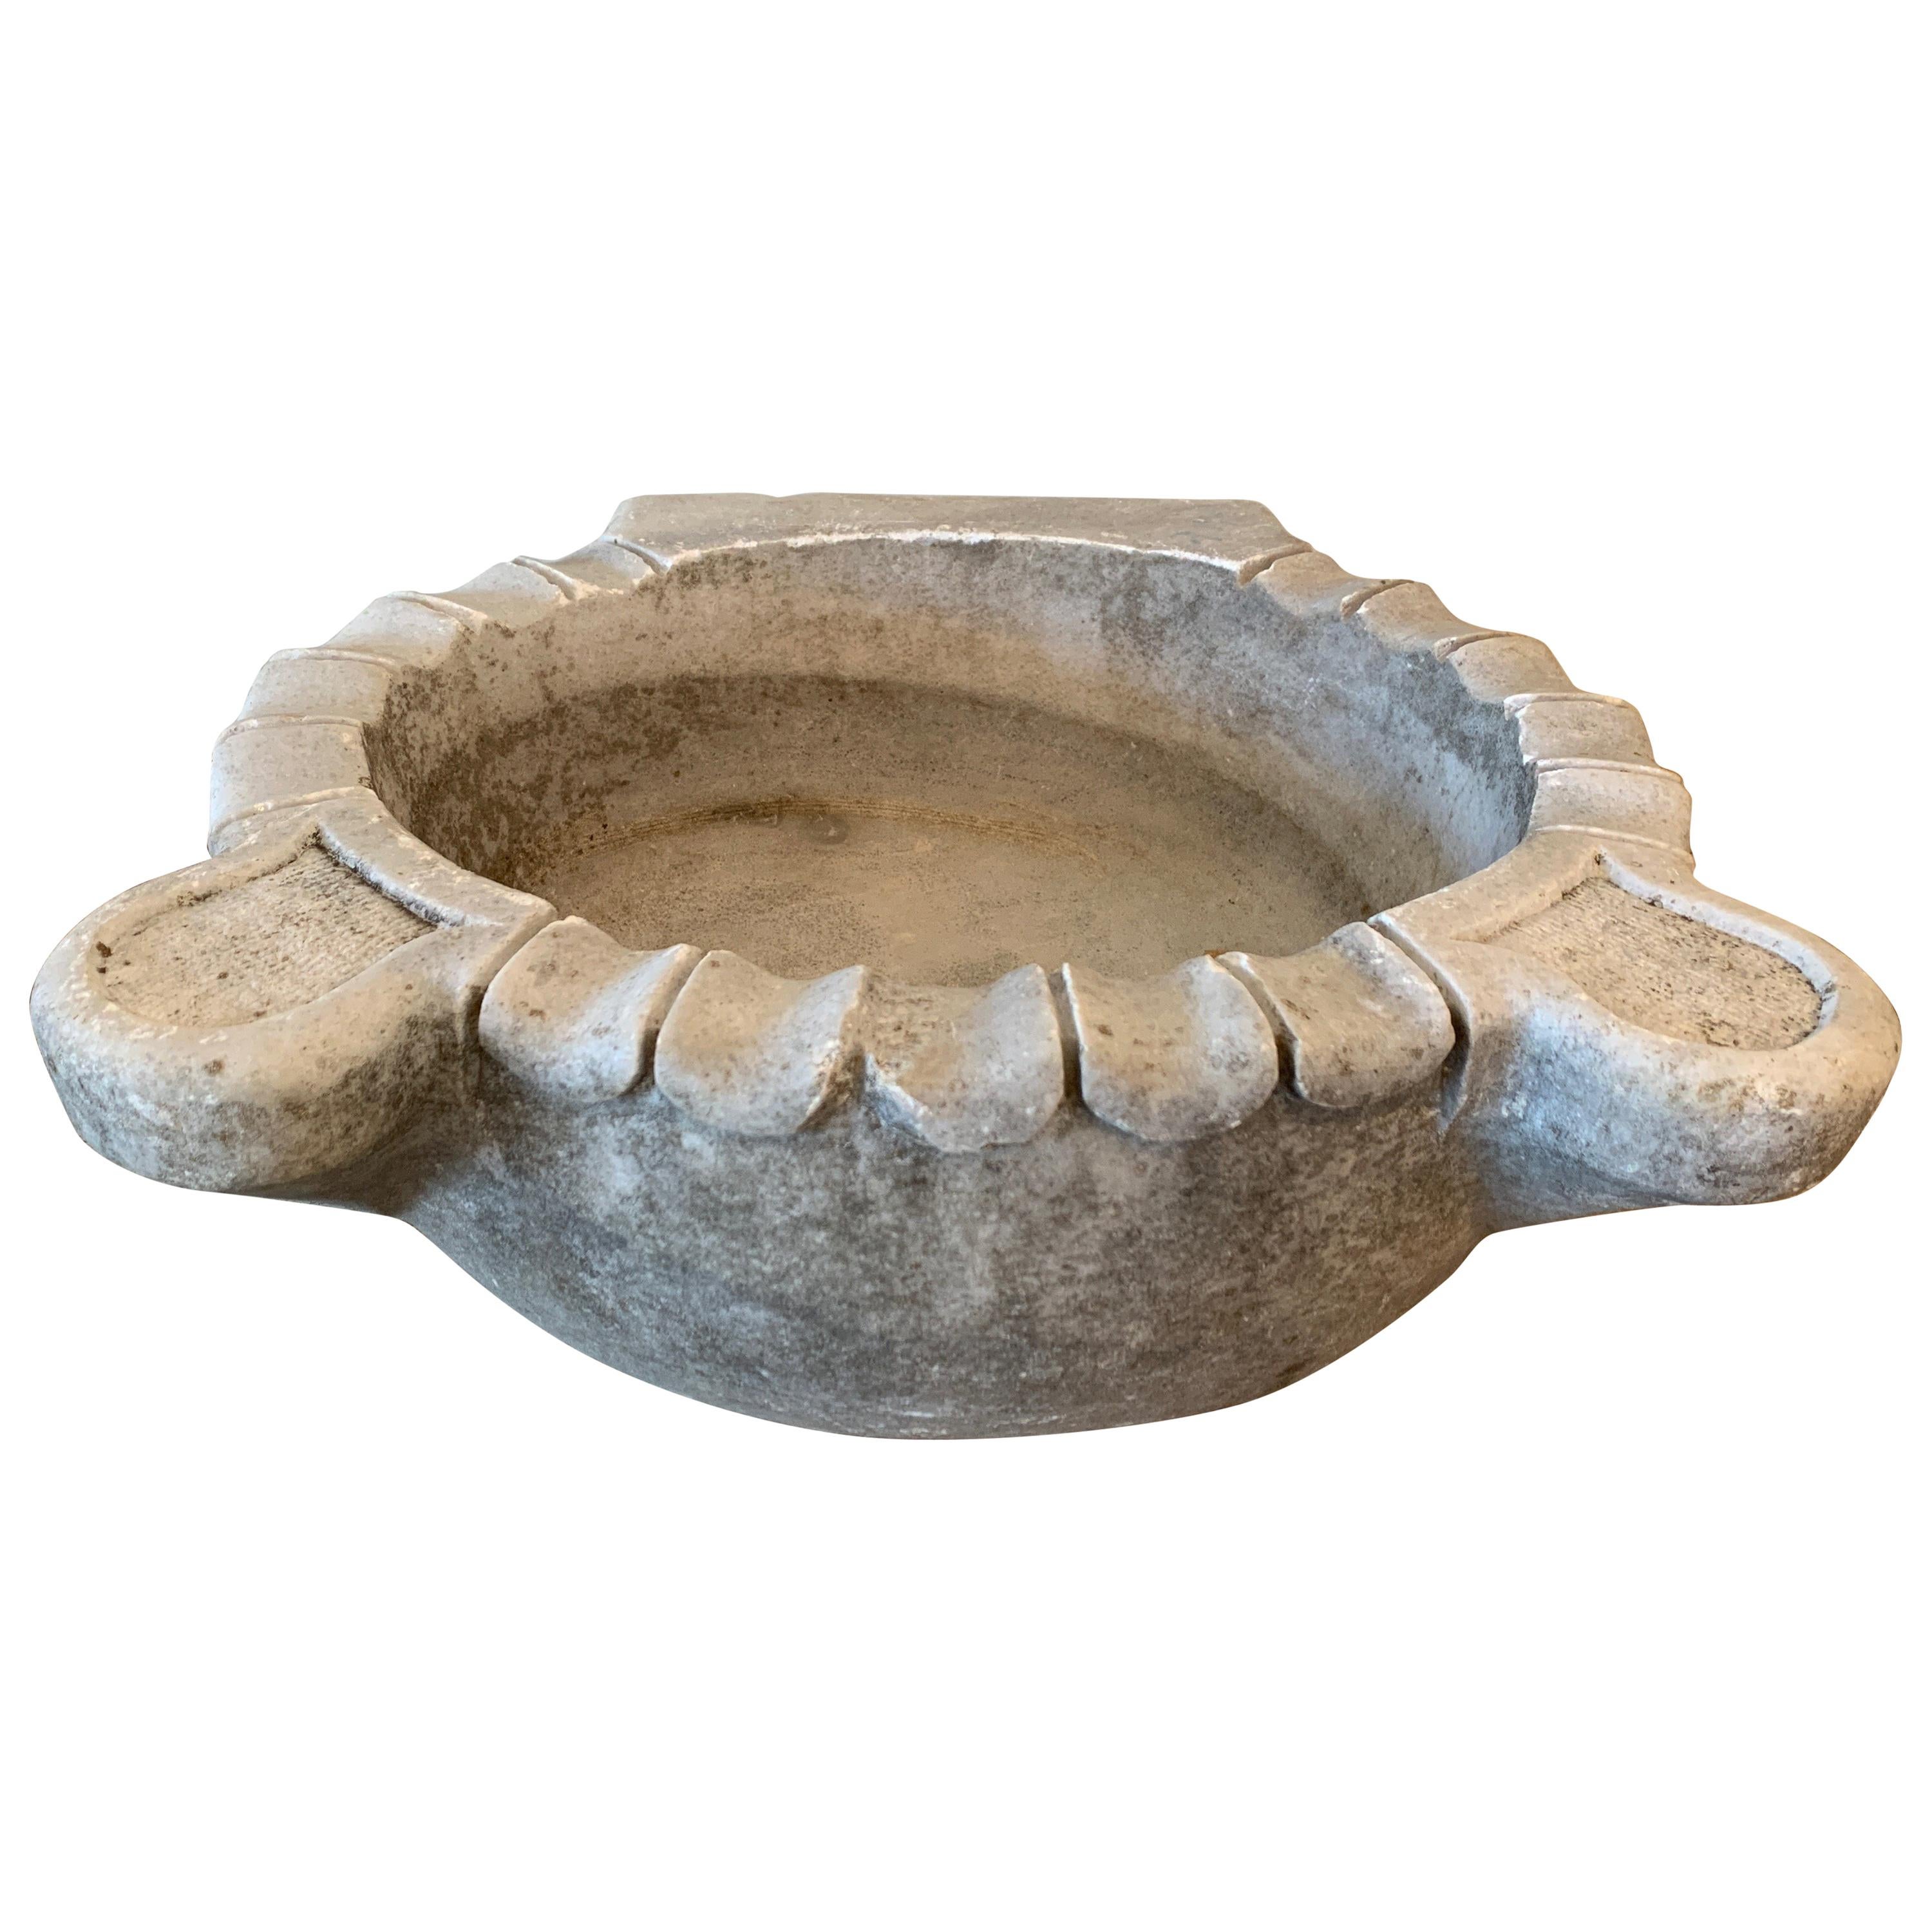 19th Century Marble Sink From Turkey